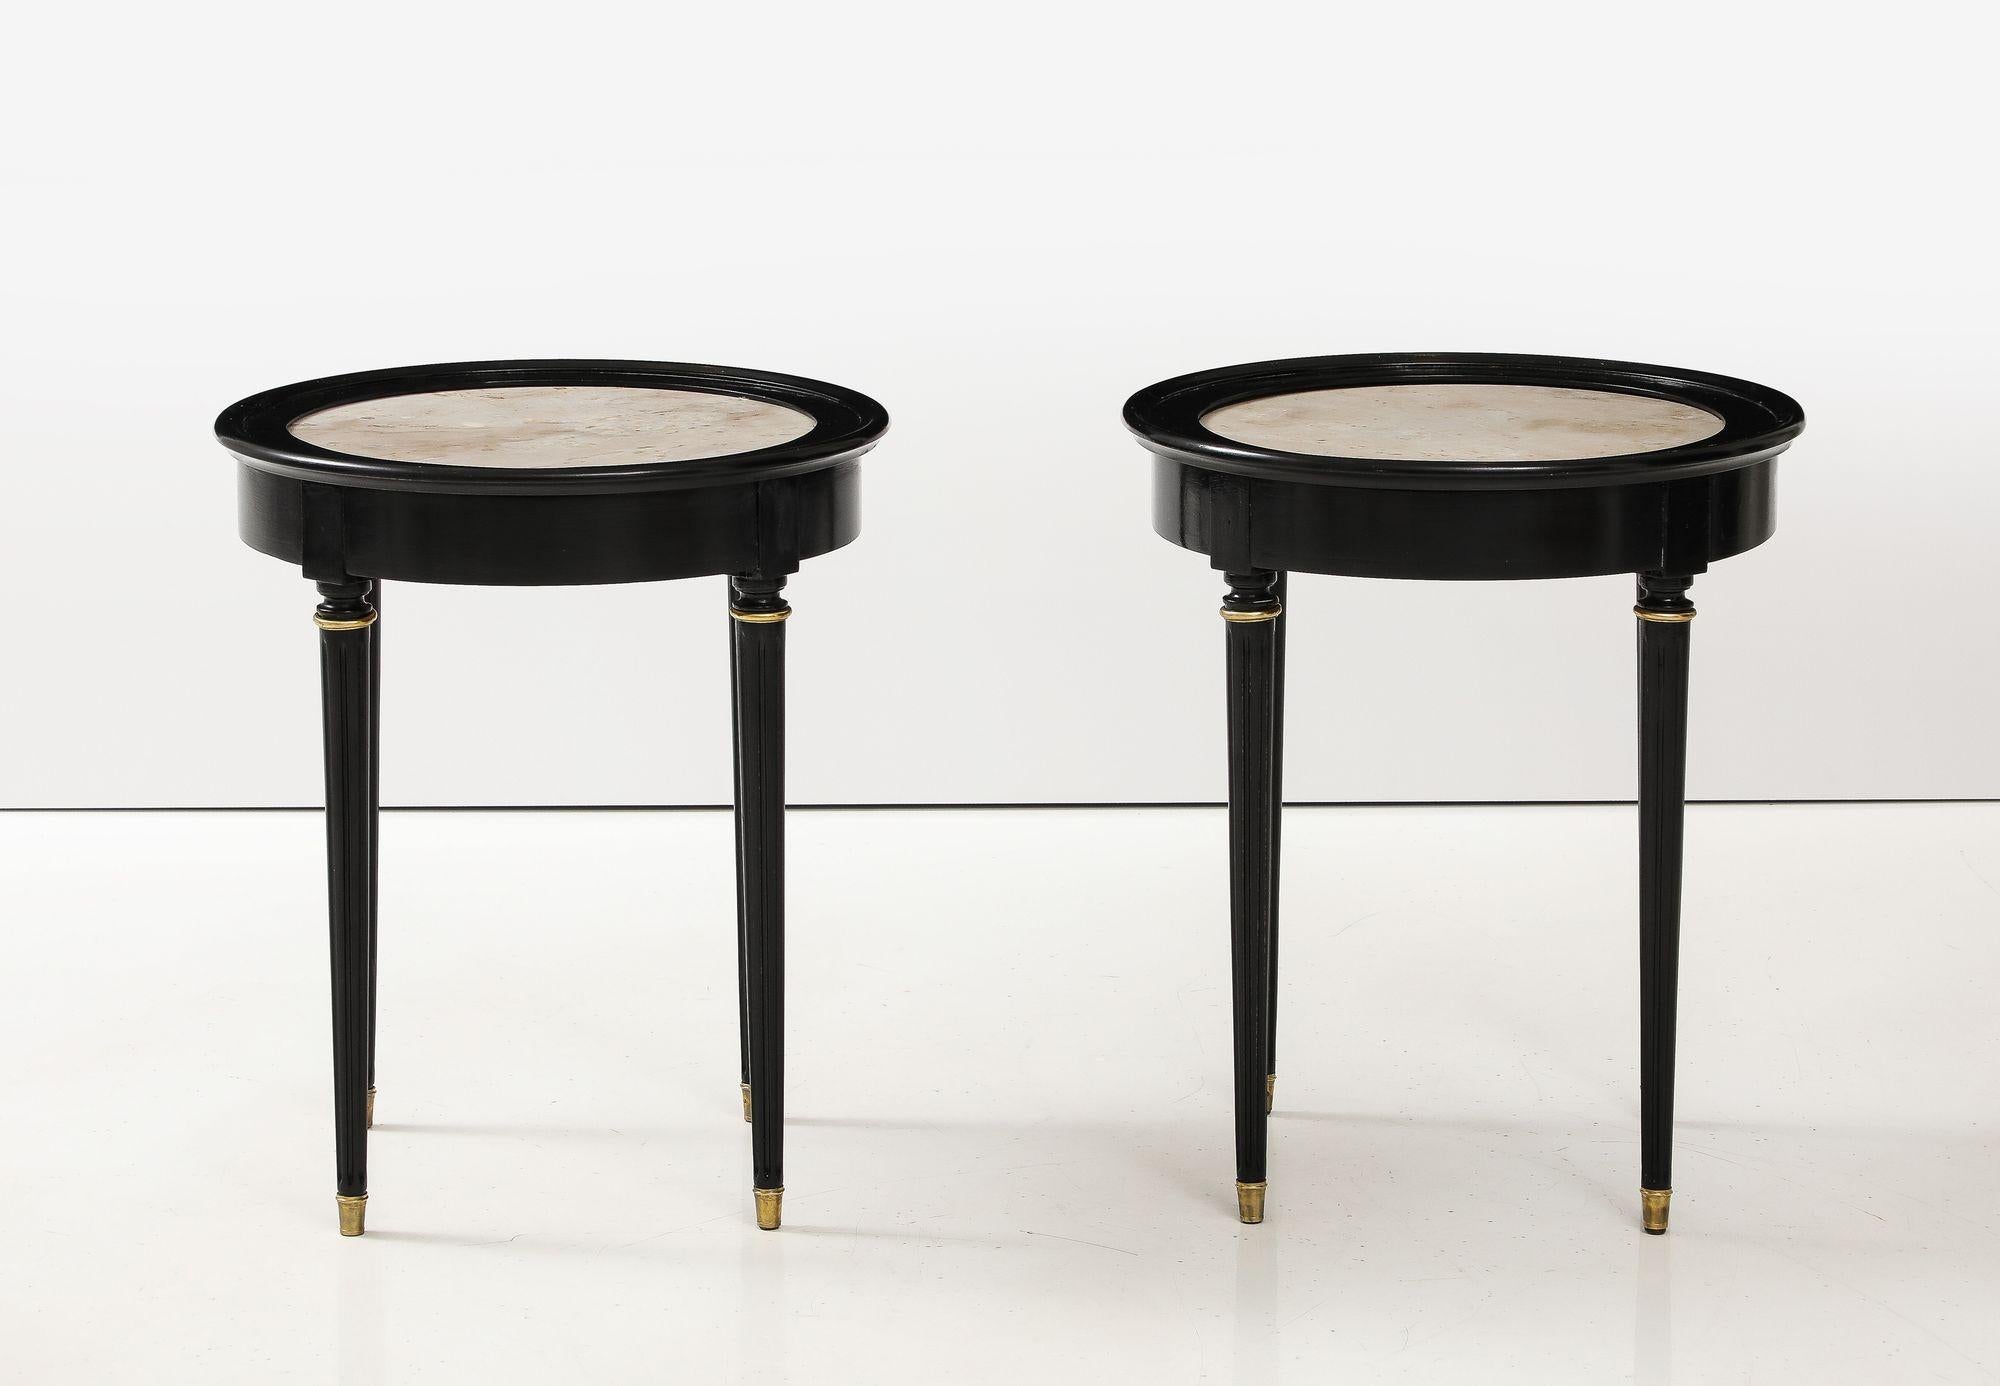 A great Pair of Black Lacquer Marble Top Circular Side Tables. A pair of marble tops are set in a black lacquer frame on four tapering legs capped in brass. In the manner of Andre Arbus
23.75